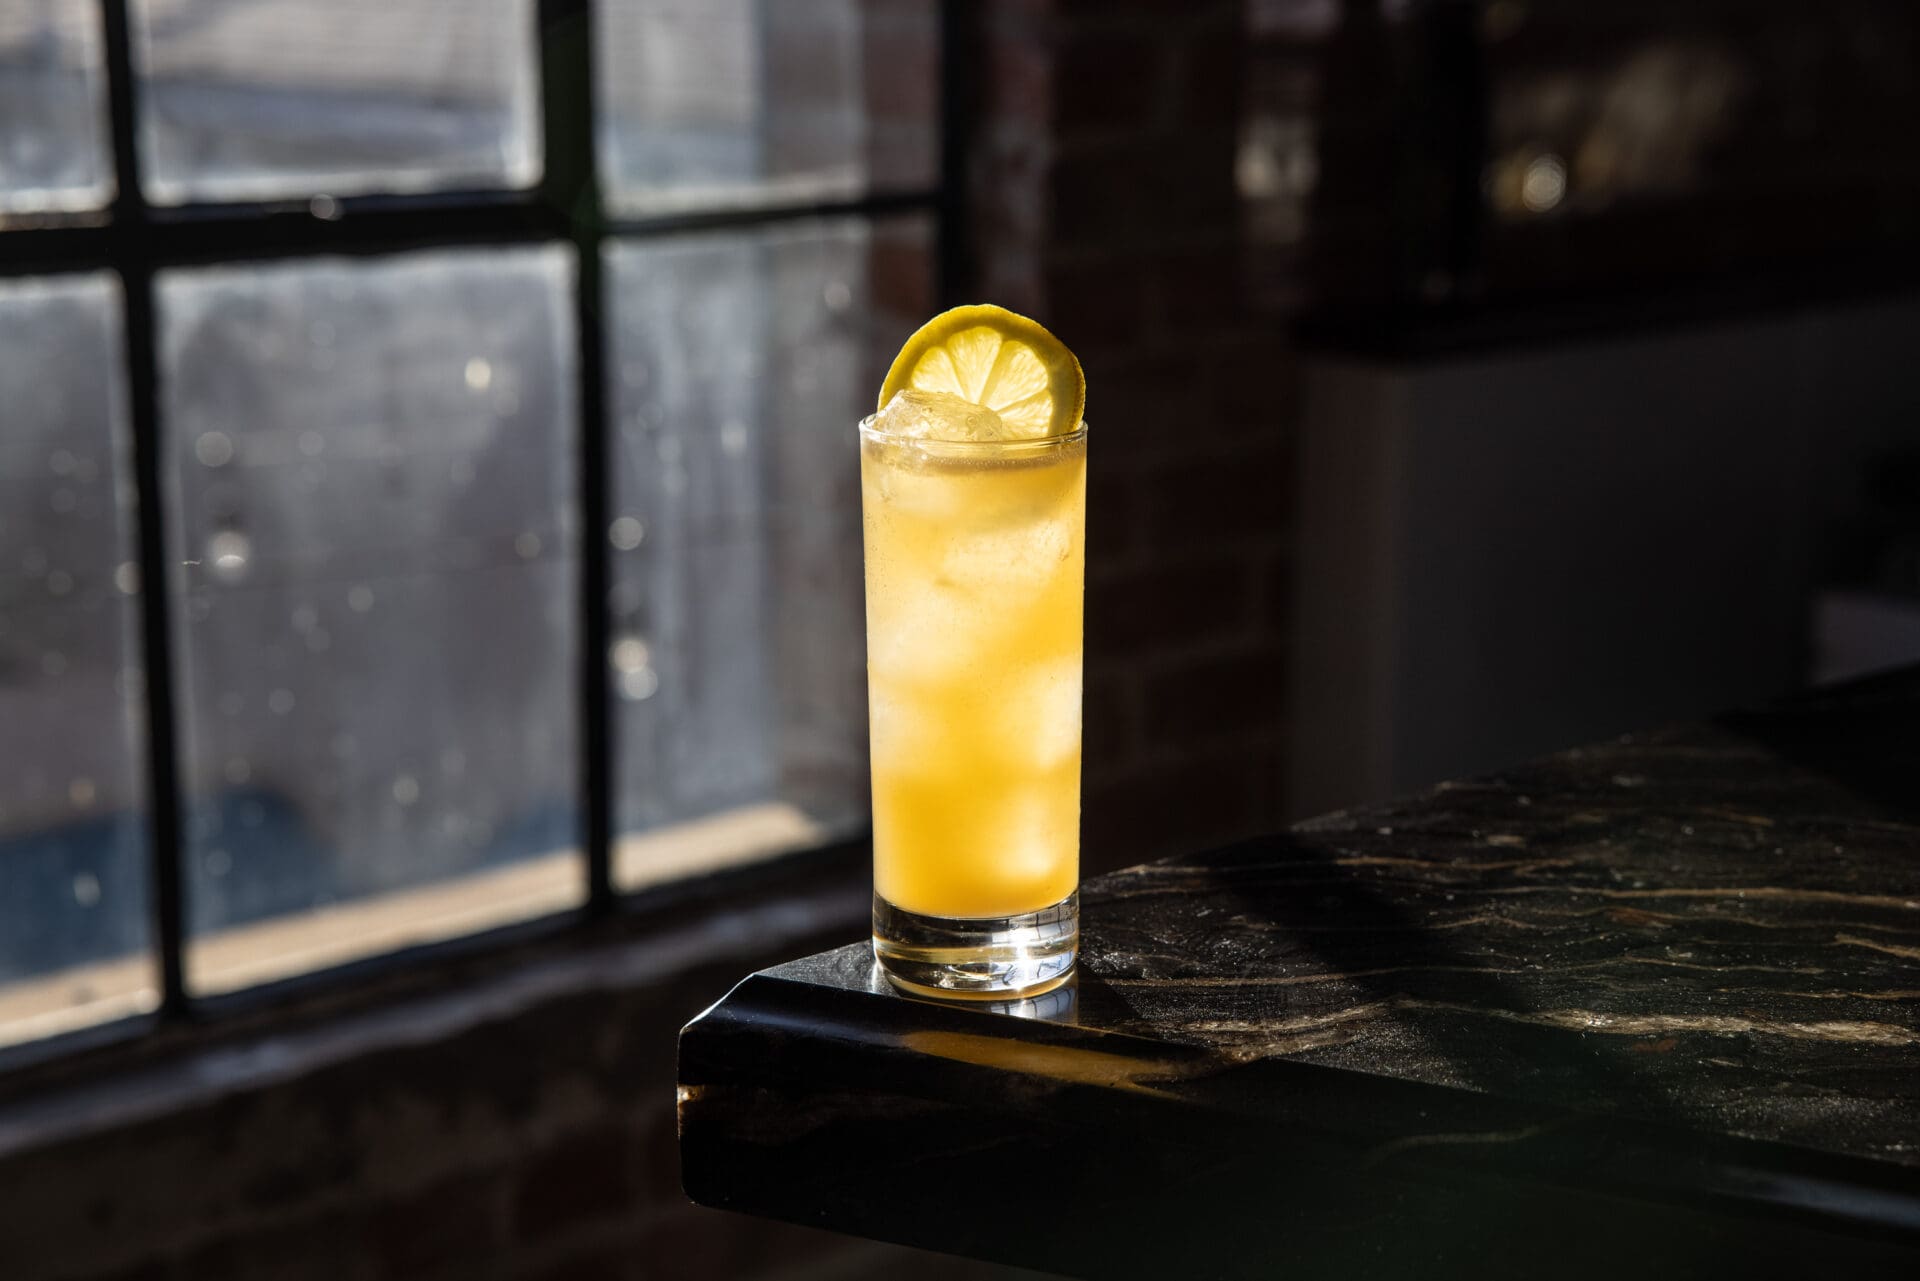 Best rooftop bars LA | A yellow cocktail in a tall glass with a lemon slice for a garnish, silhouetted against a warehouse-style window